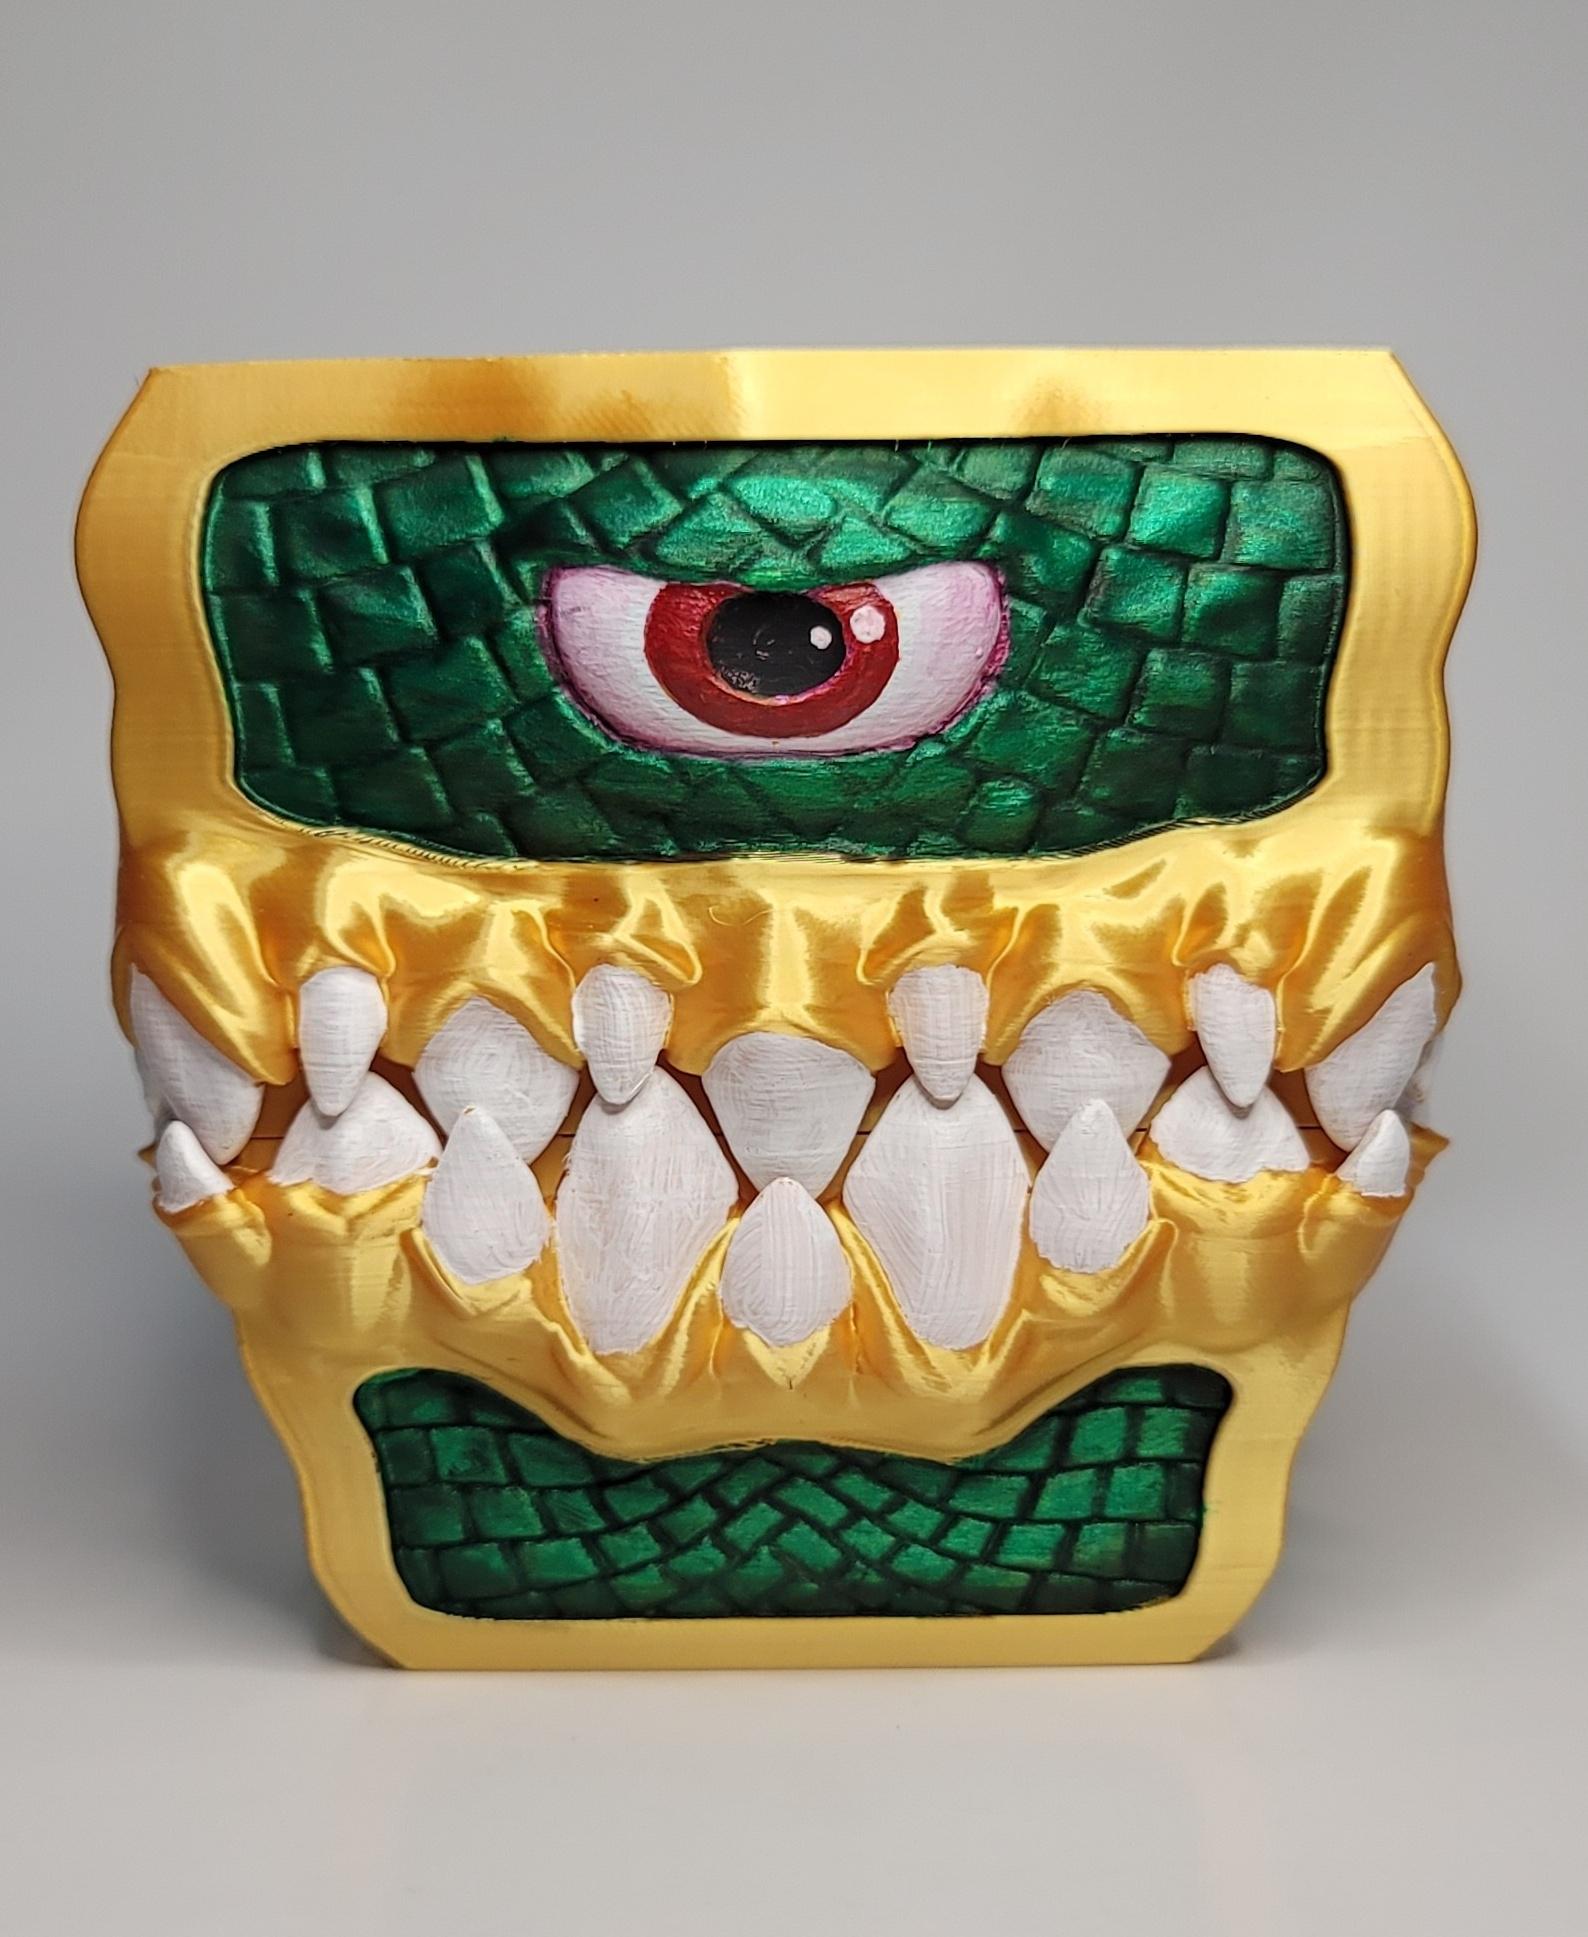 Two-faced Mimic storage box 3d model